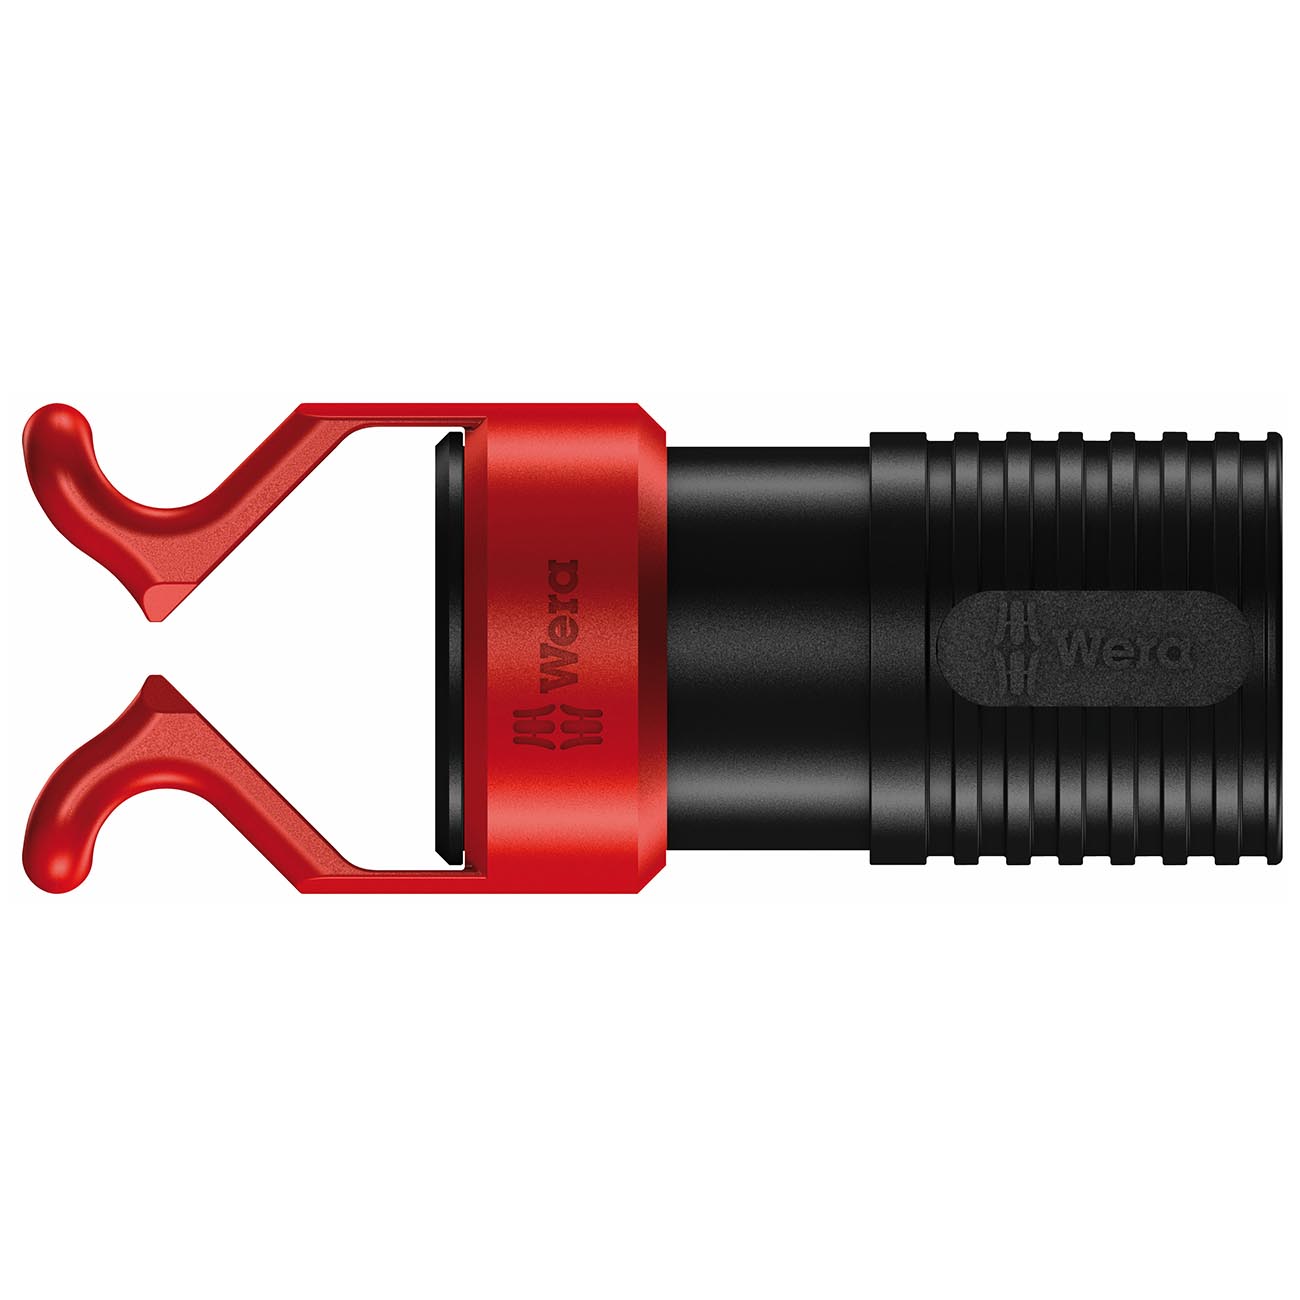 Wera 1441 Sb Screw Gripper With Holding Function